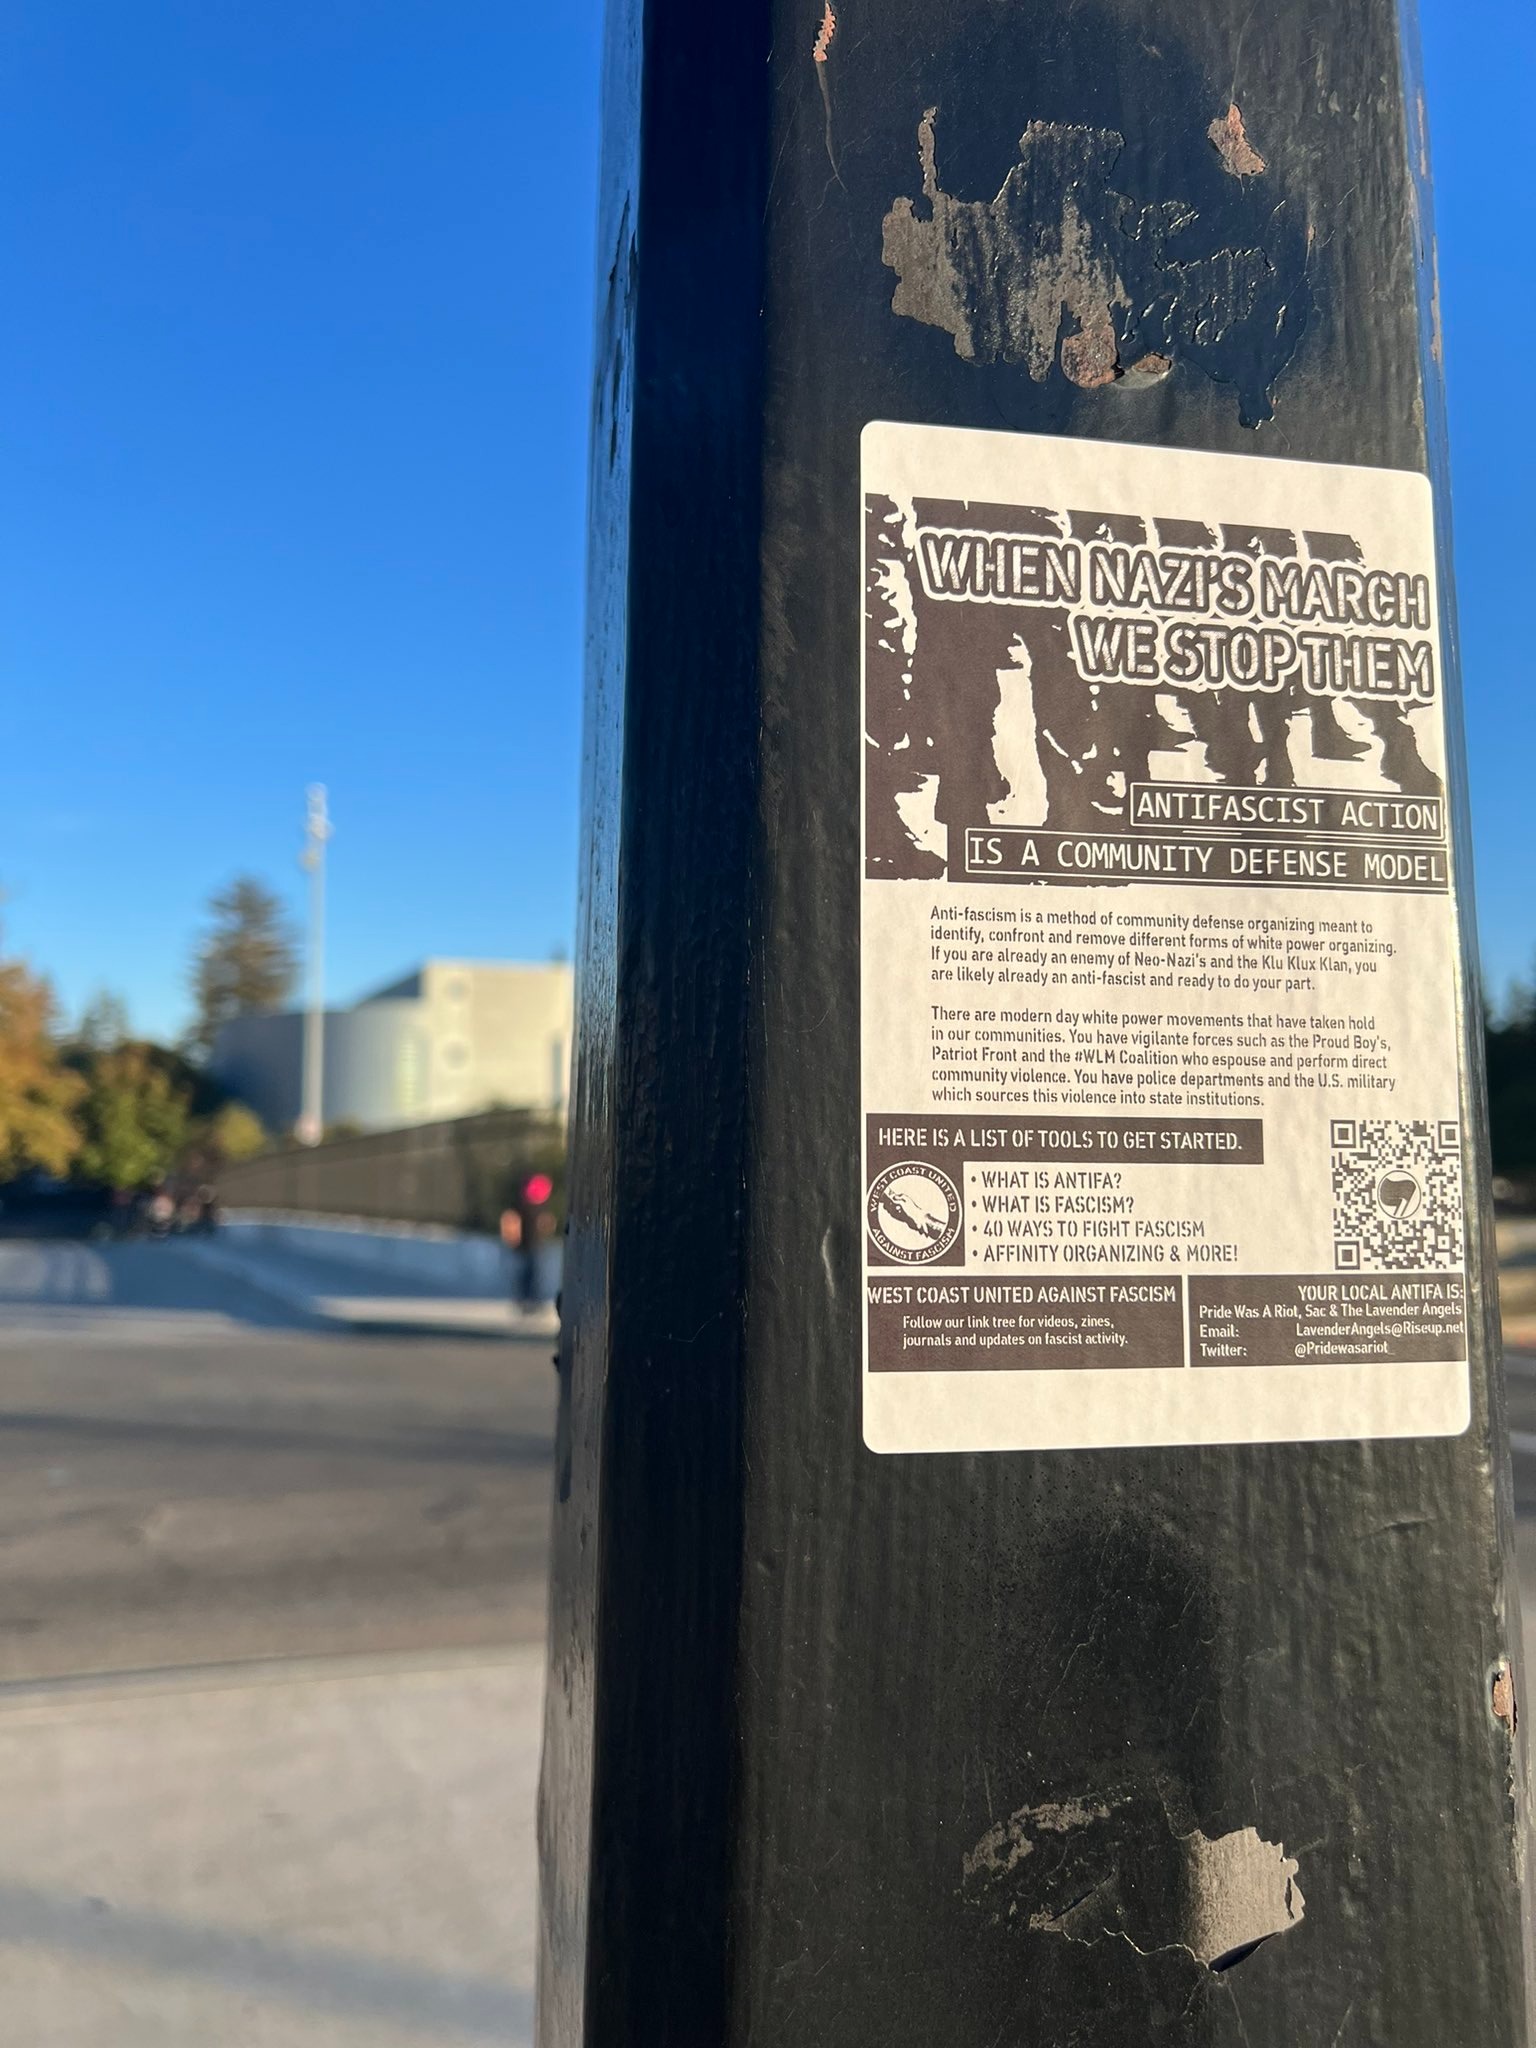 A flyer reads "when Nazis march we stop them. Antifascist action as community defense model." In the distance is a bridge.